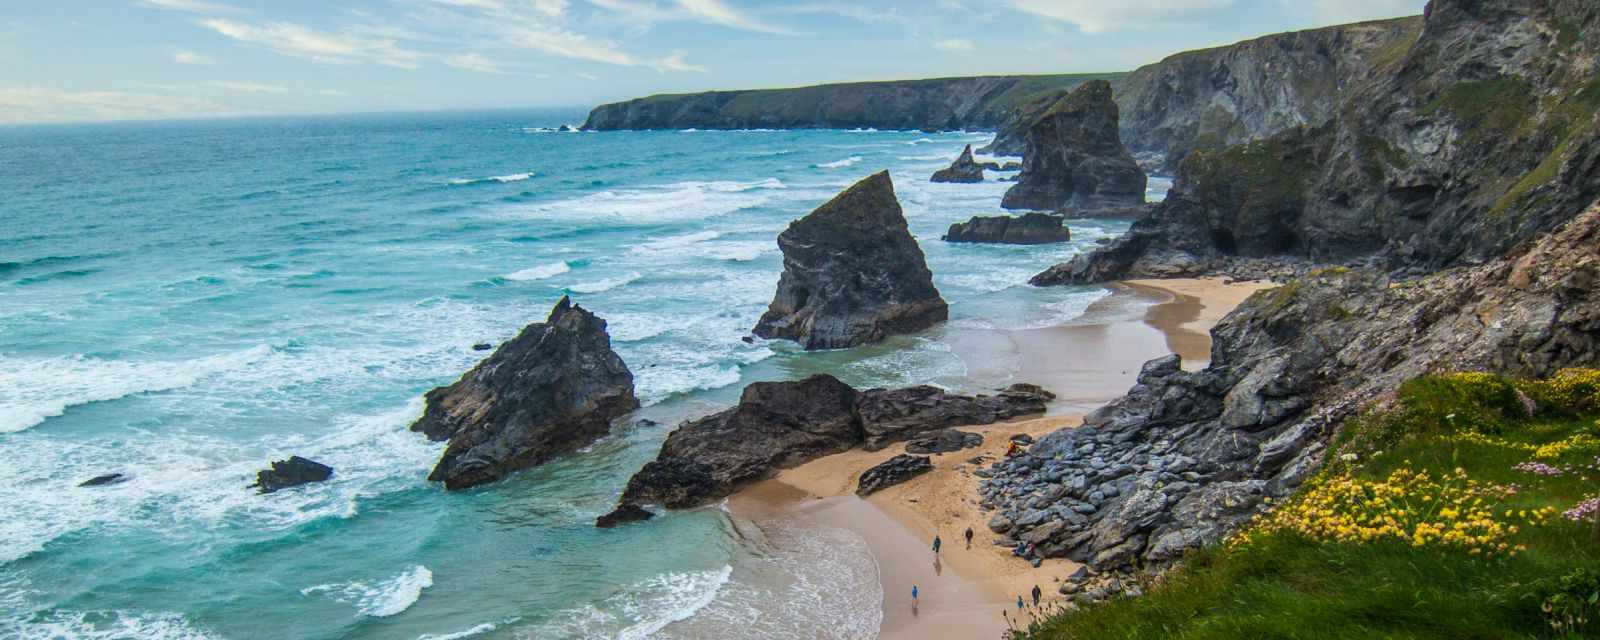 Bedruthan Steps Beach at Low Tide in Cornwall